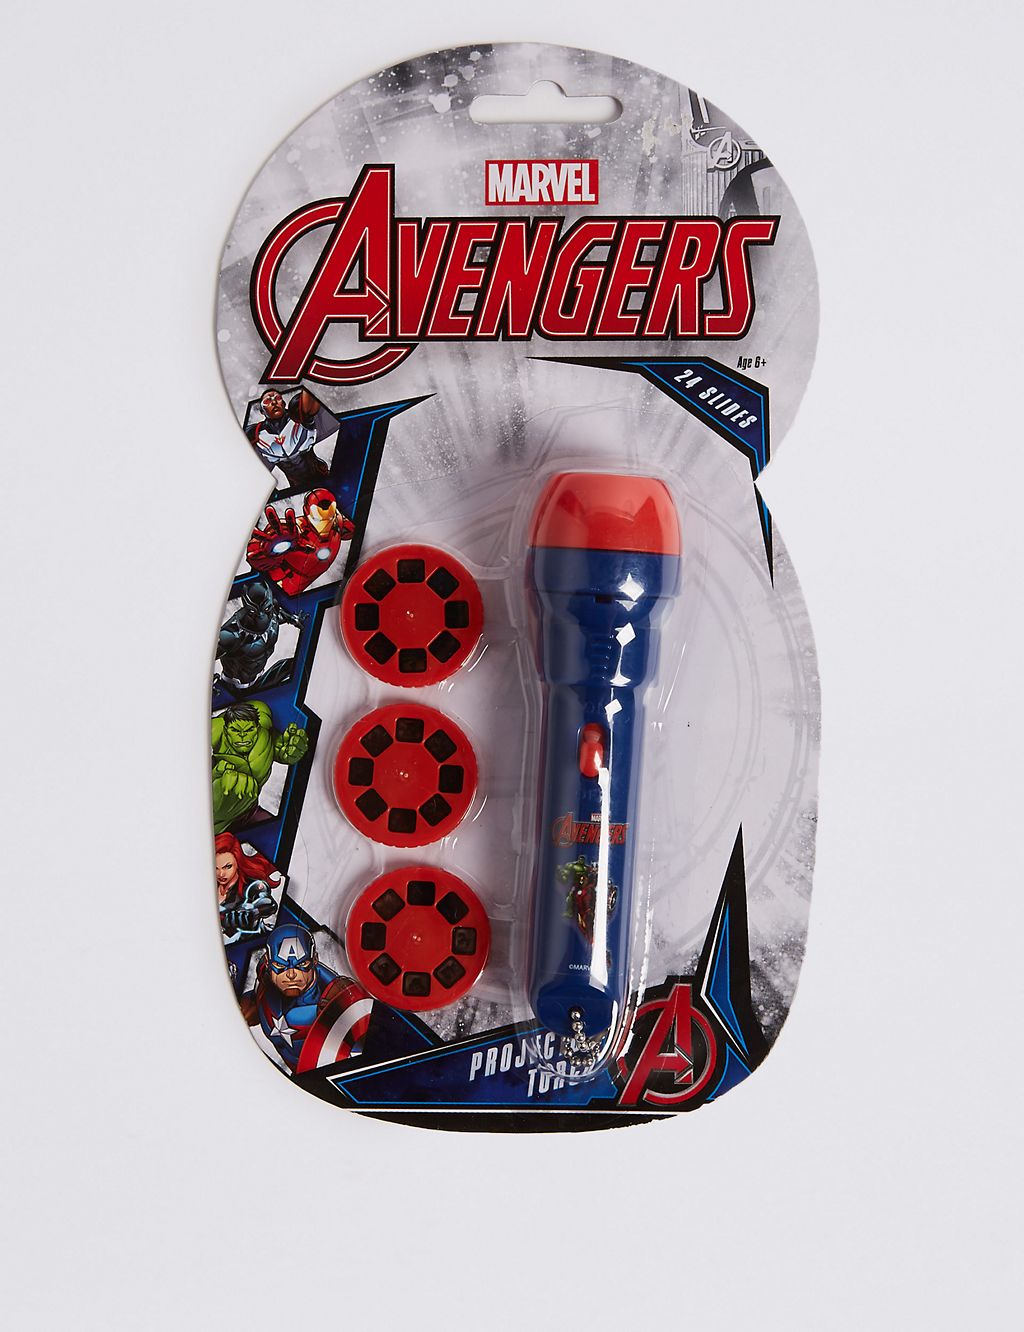 Marvel Avengers™ Projector Torch 3 of 5